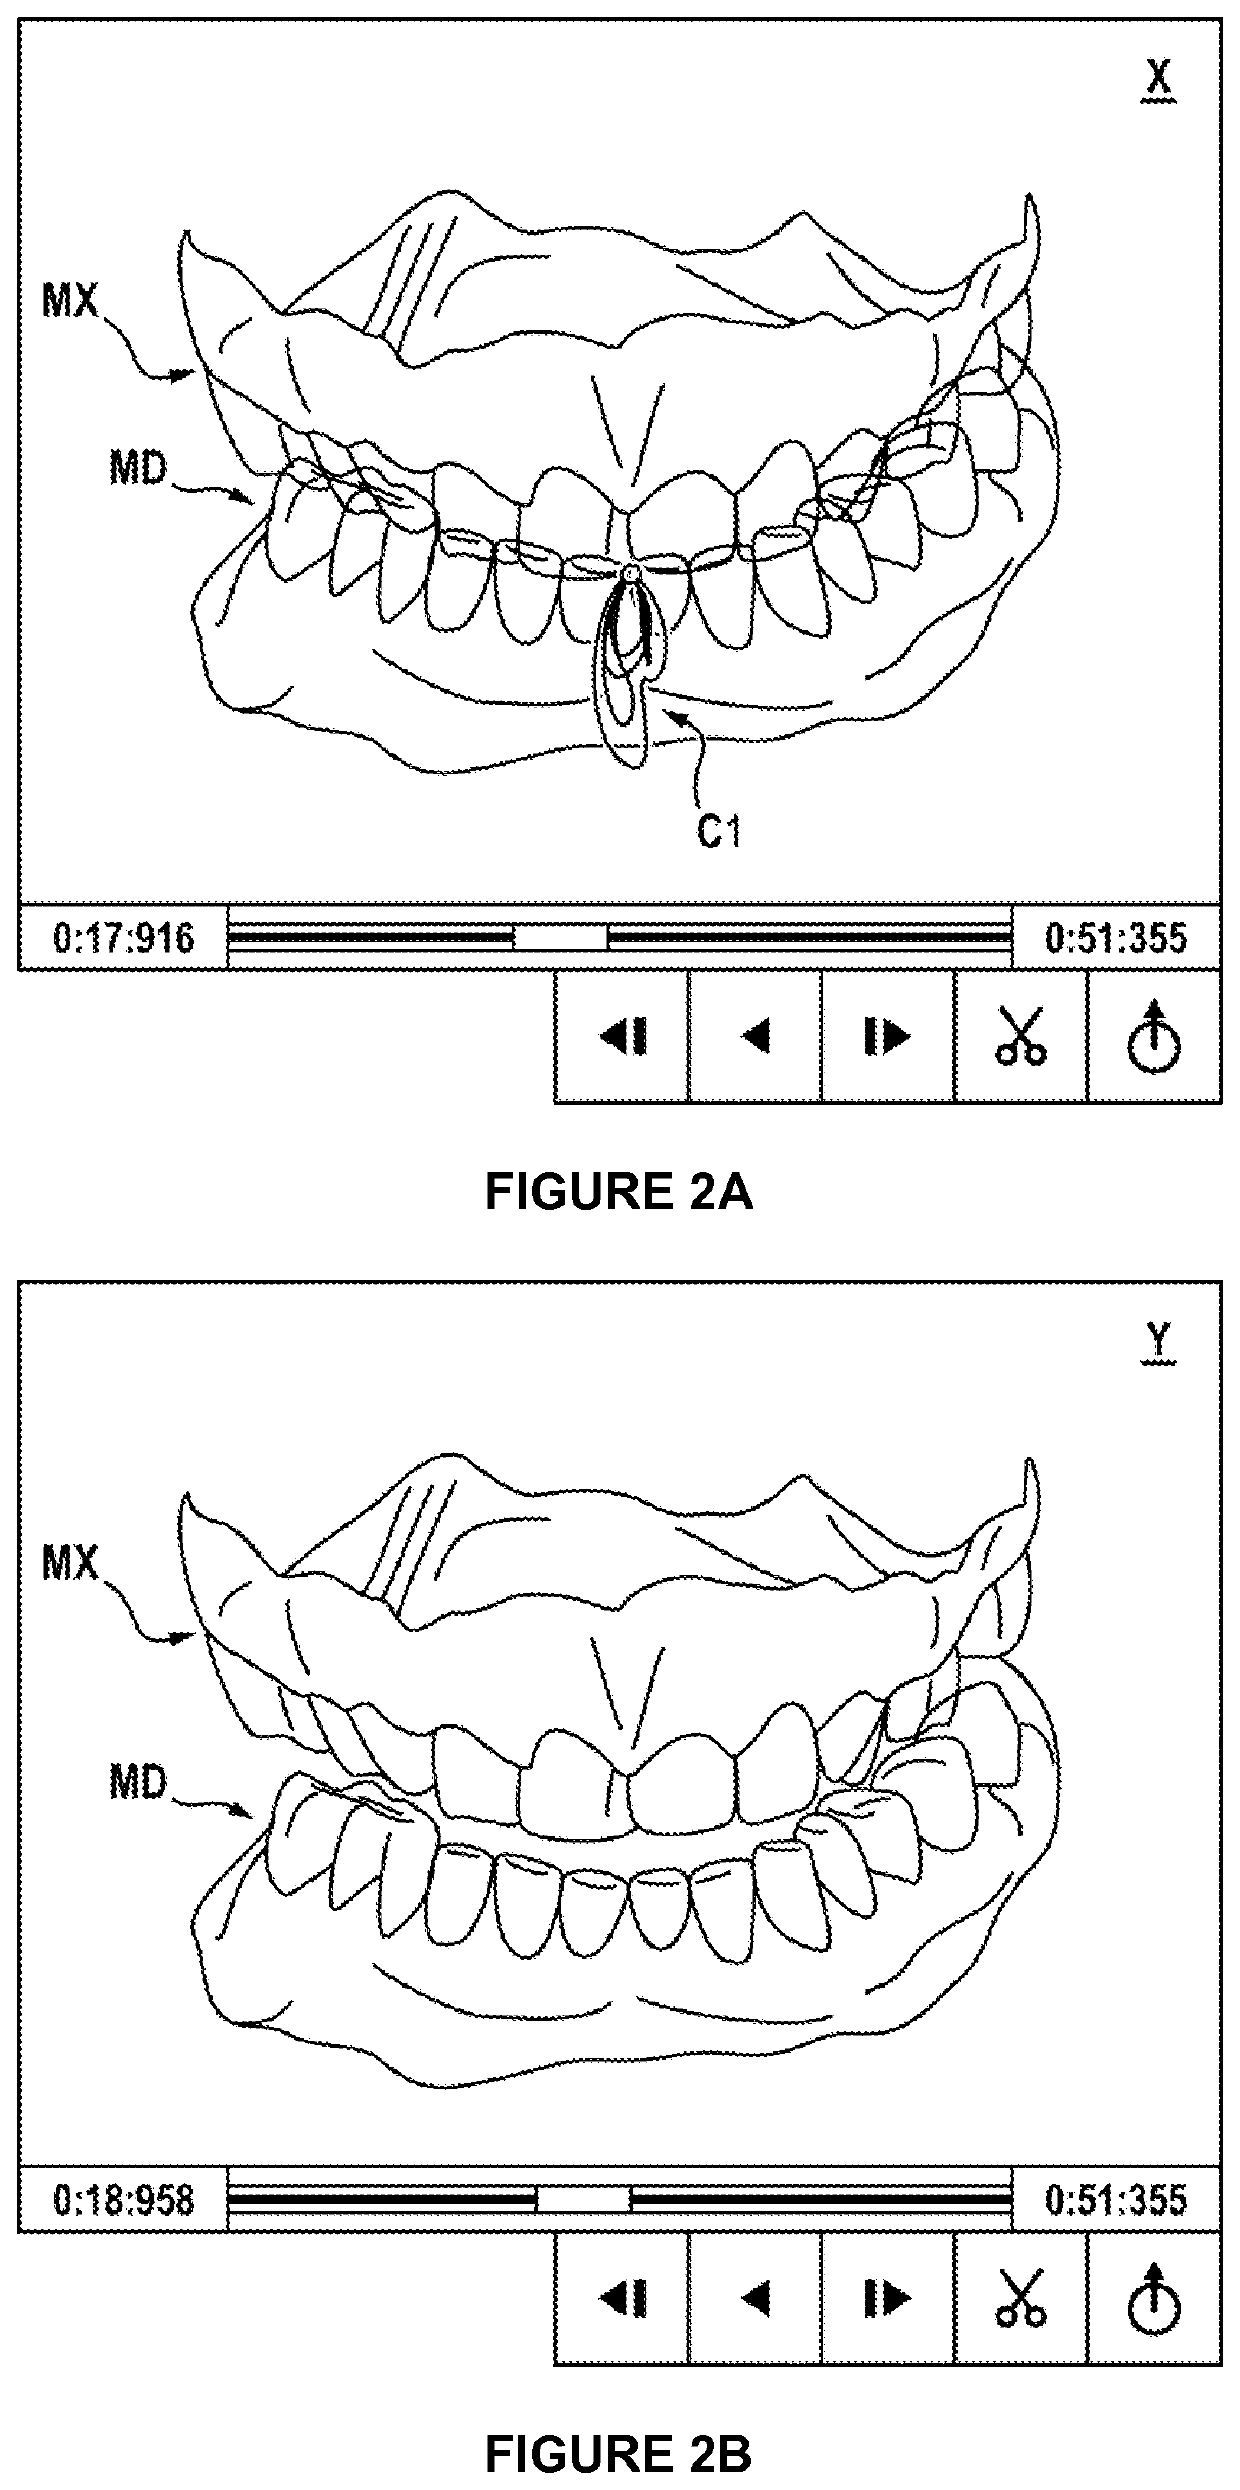 Method for animating models of the mandibular and maxillary arches of a patient in a corrected intermaxillary relationship